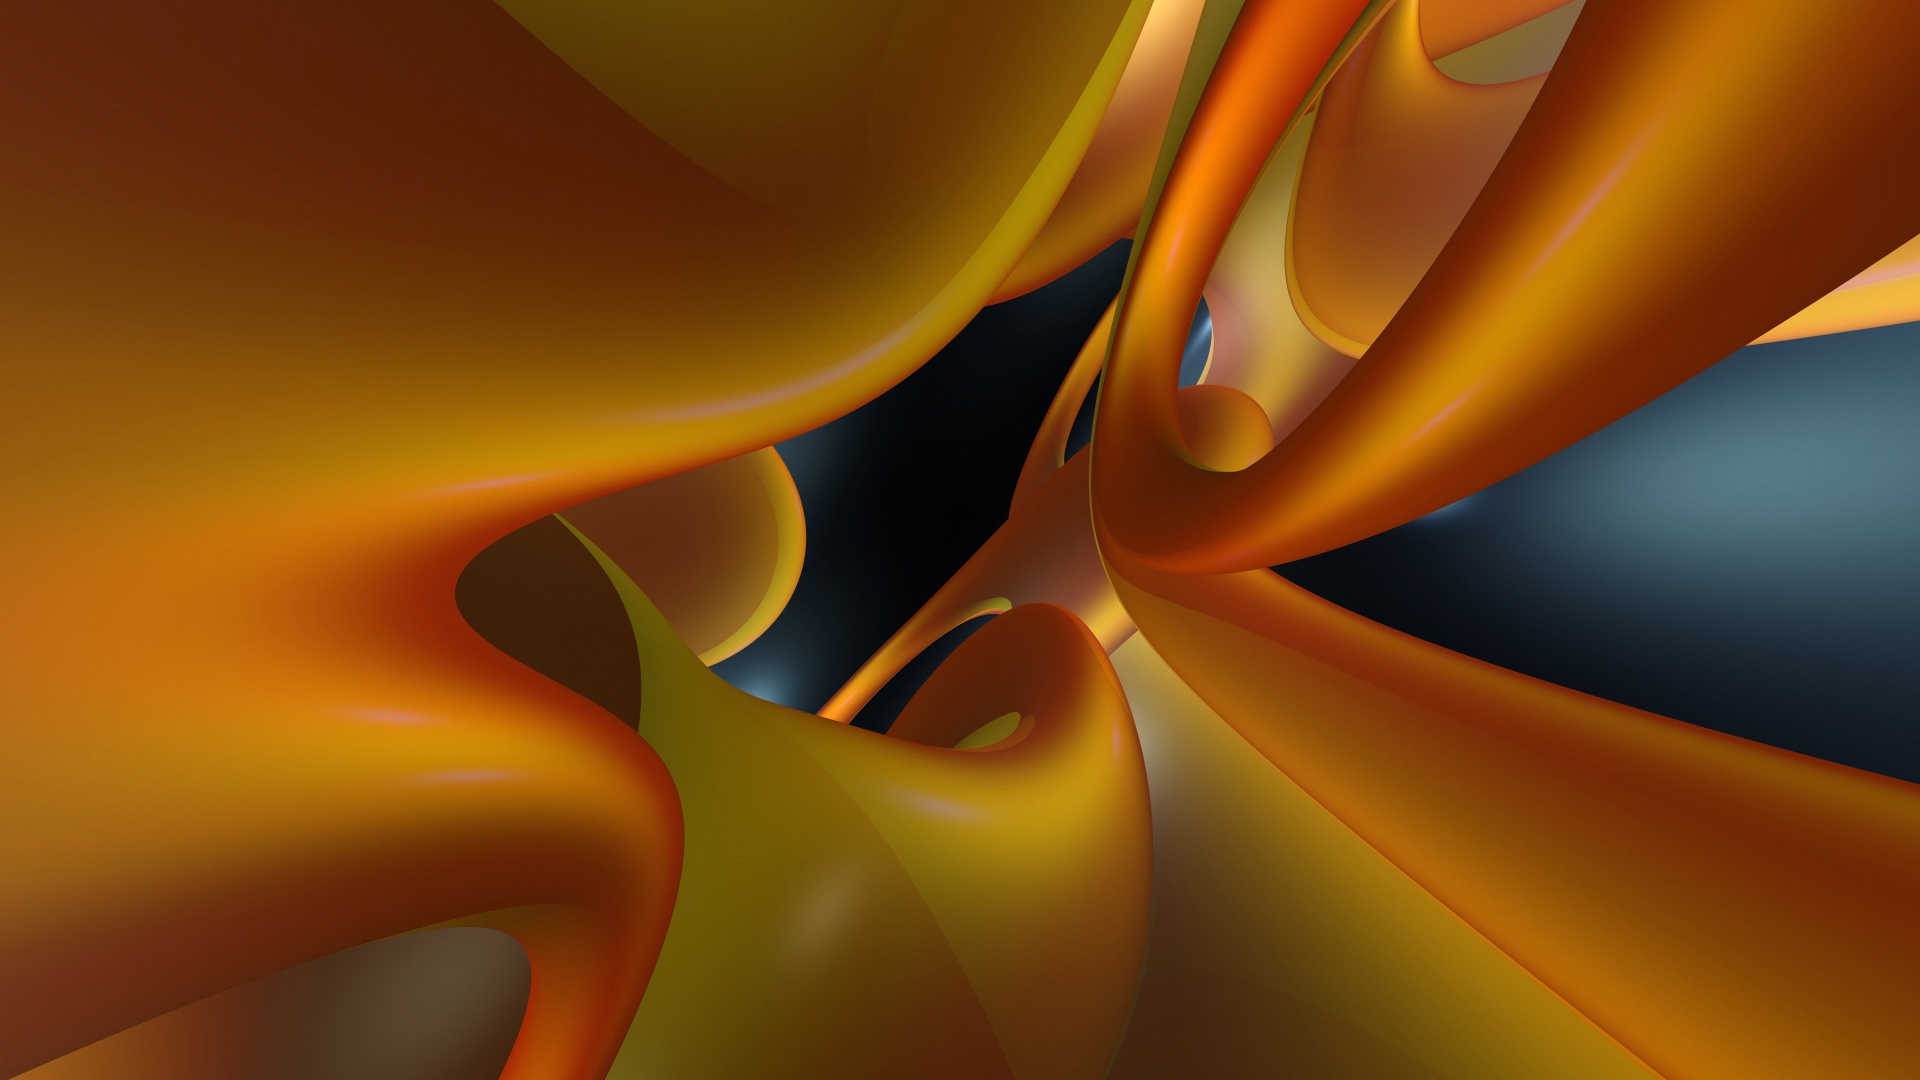 Glossy Abstract HD Wallpaper Image In Collection